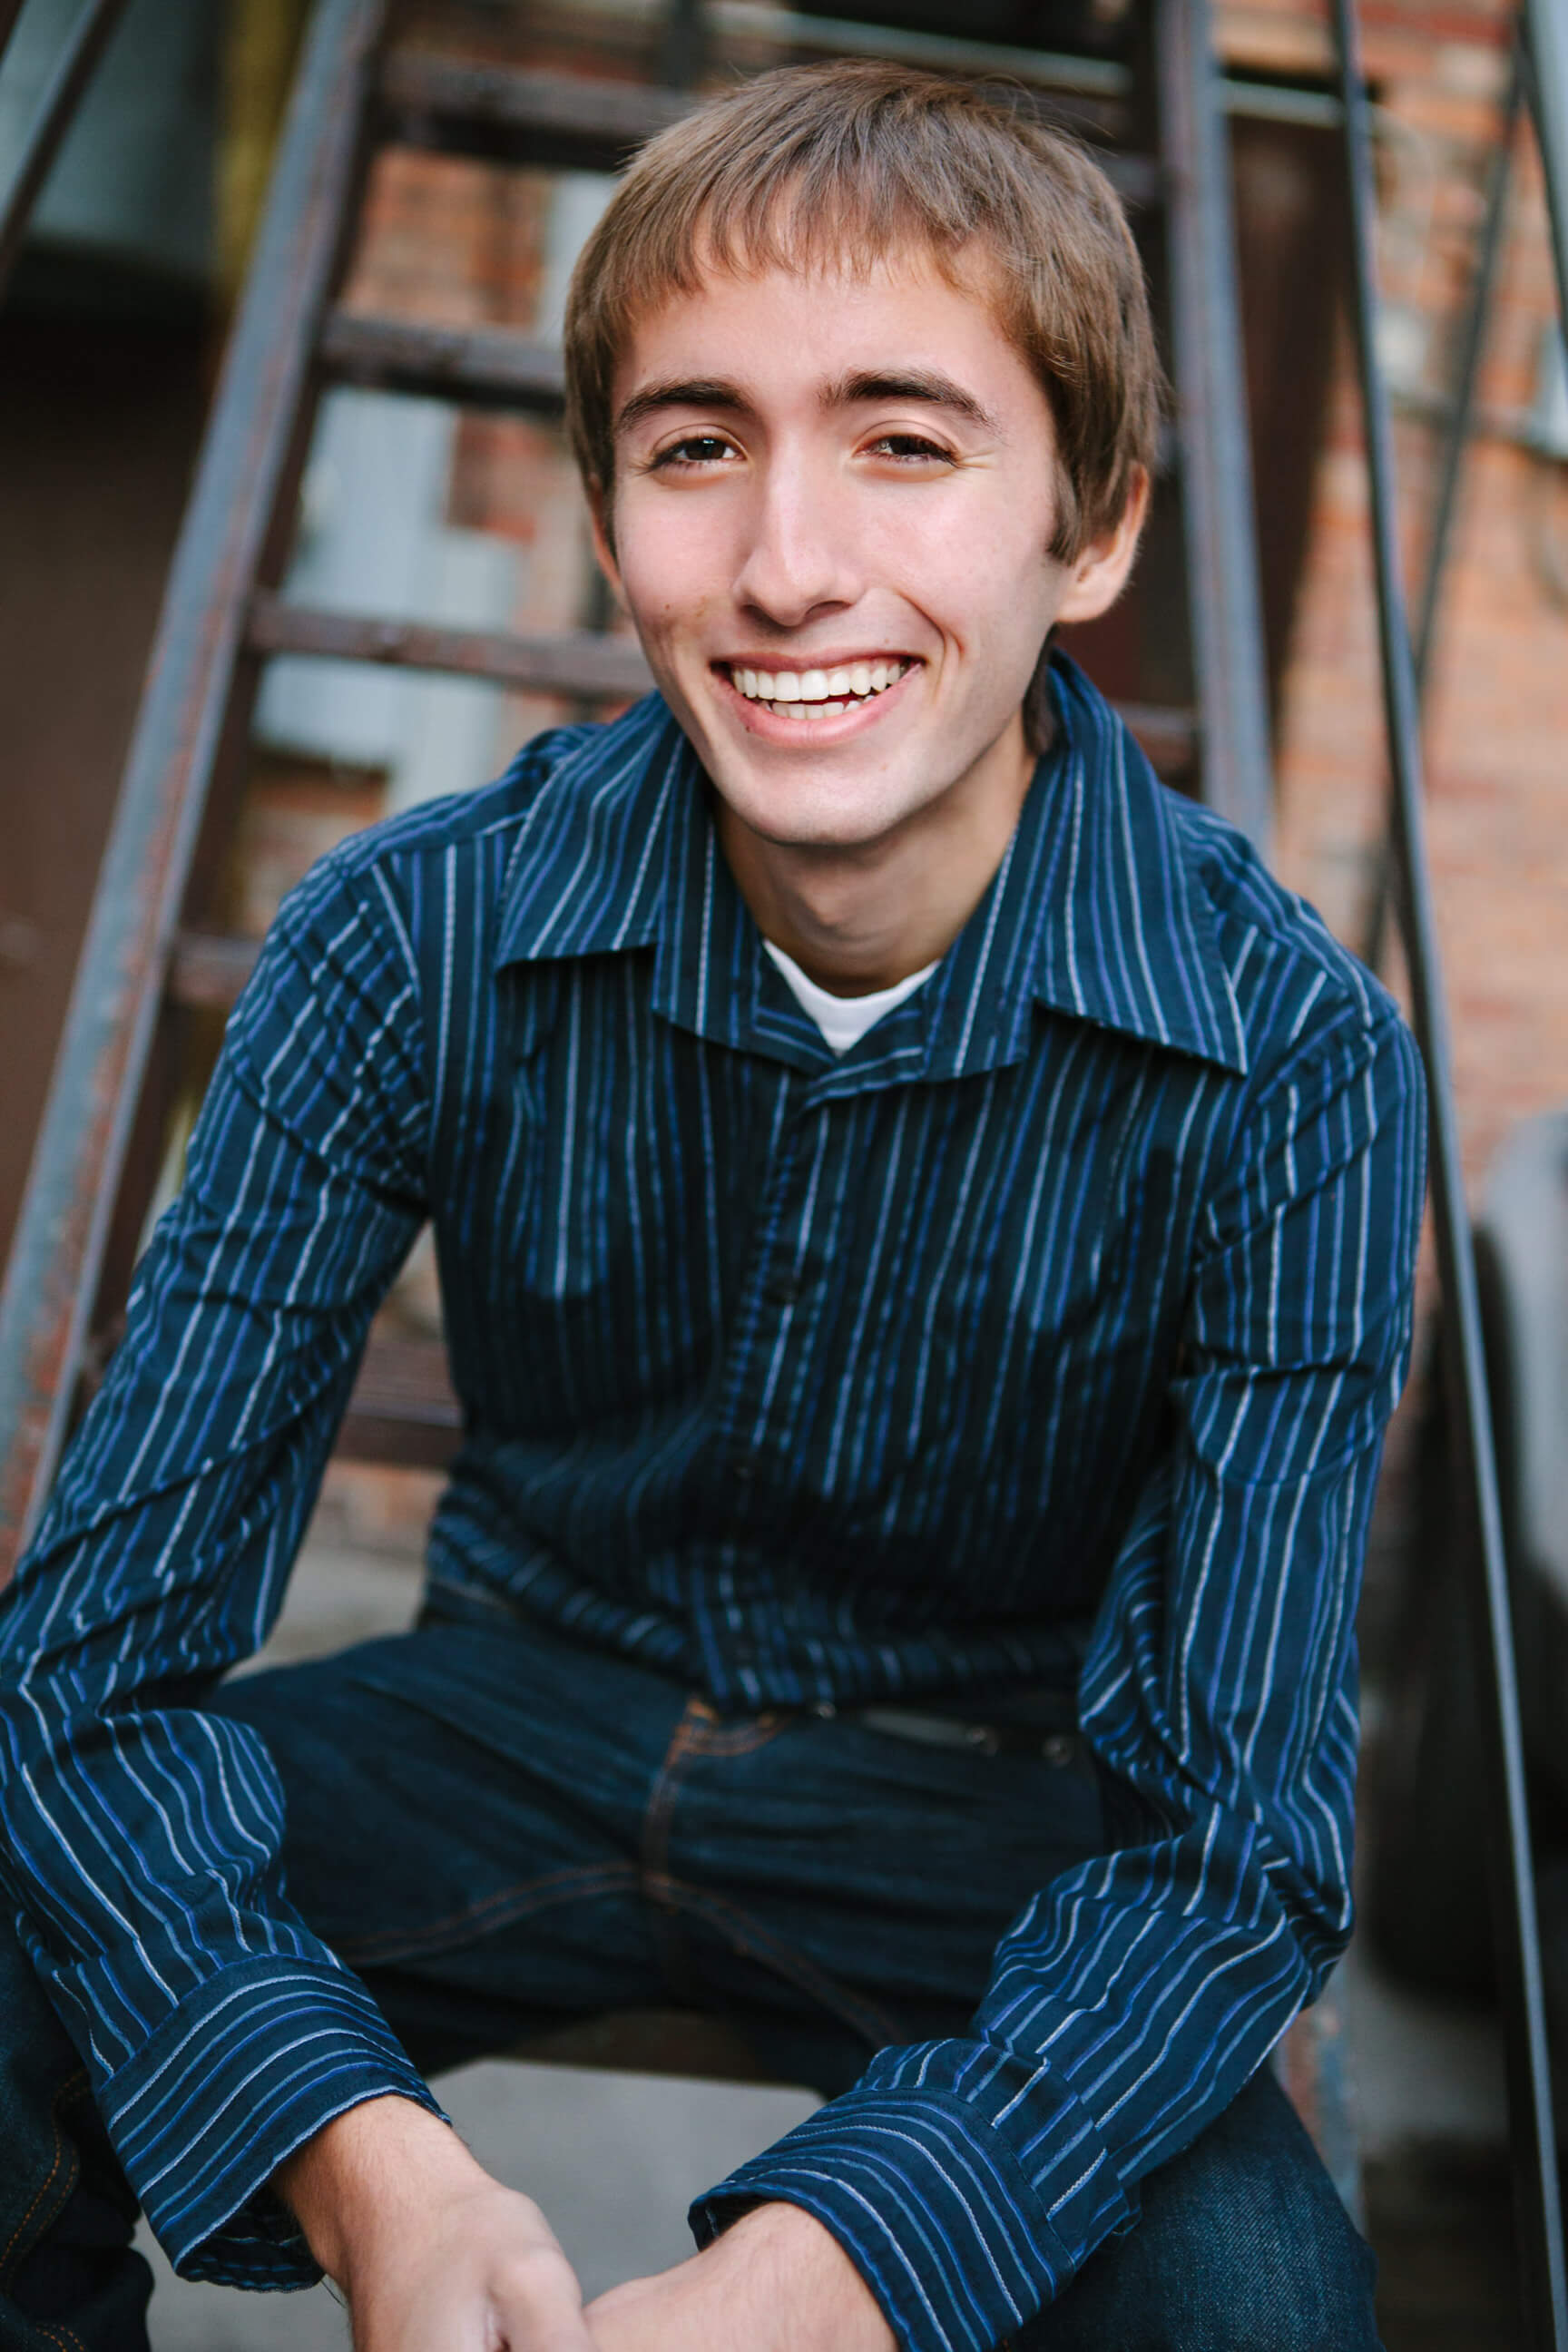 A senior boy sits on some stairs and smiles during his senior photos in Missoula Montana